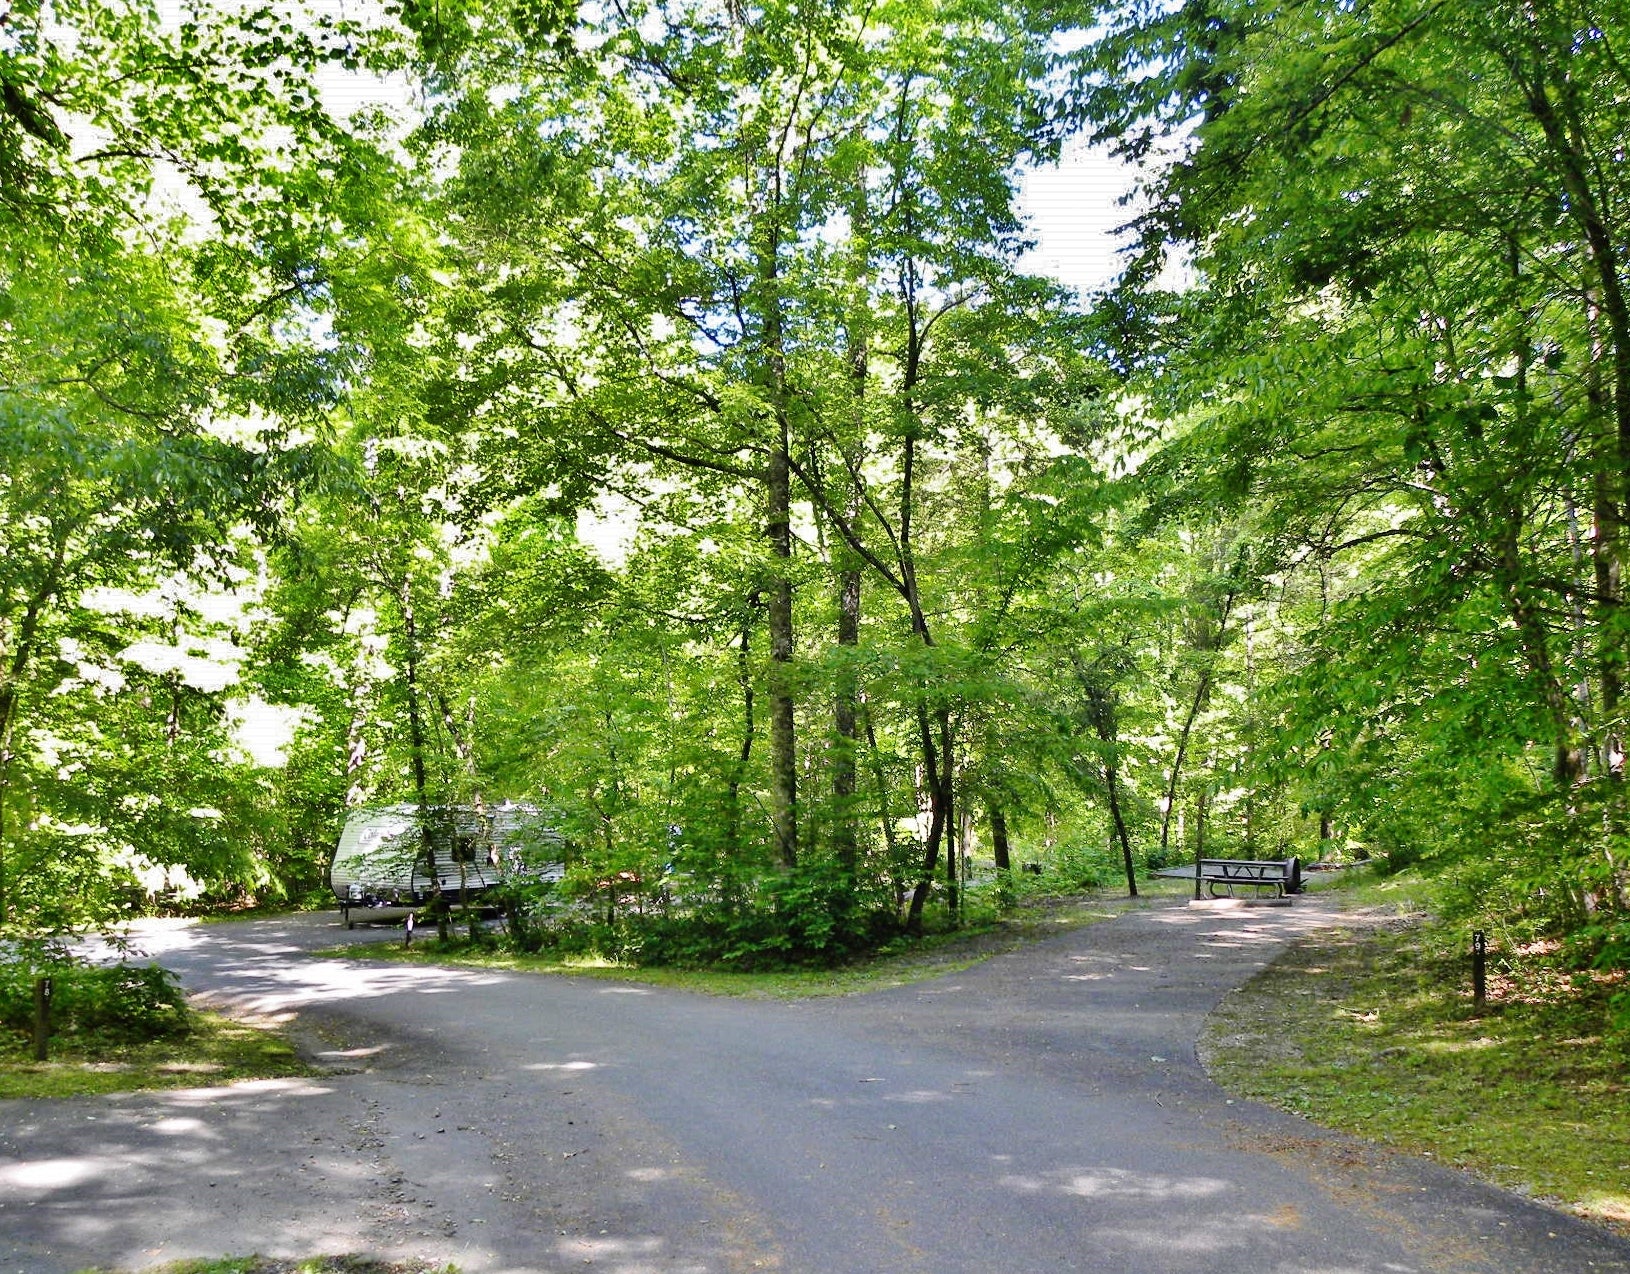 In another section of the campground, the sites are better suited for RVs.  There are back-in sites as well as pull-through sites.